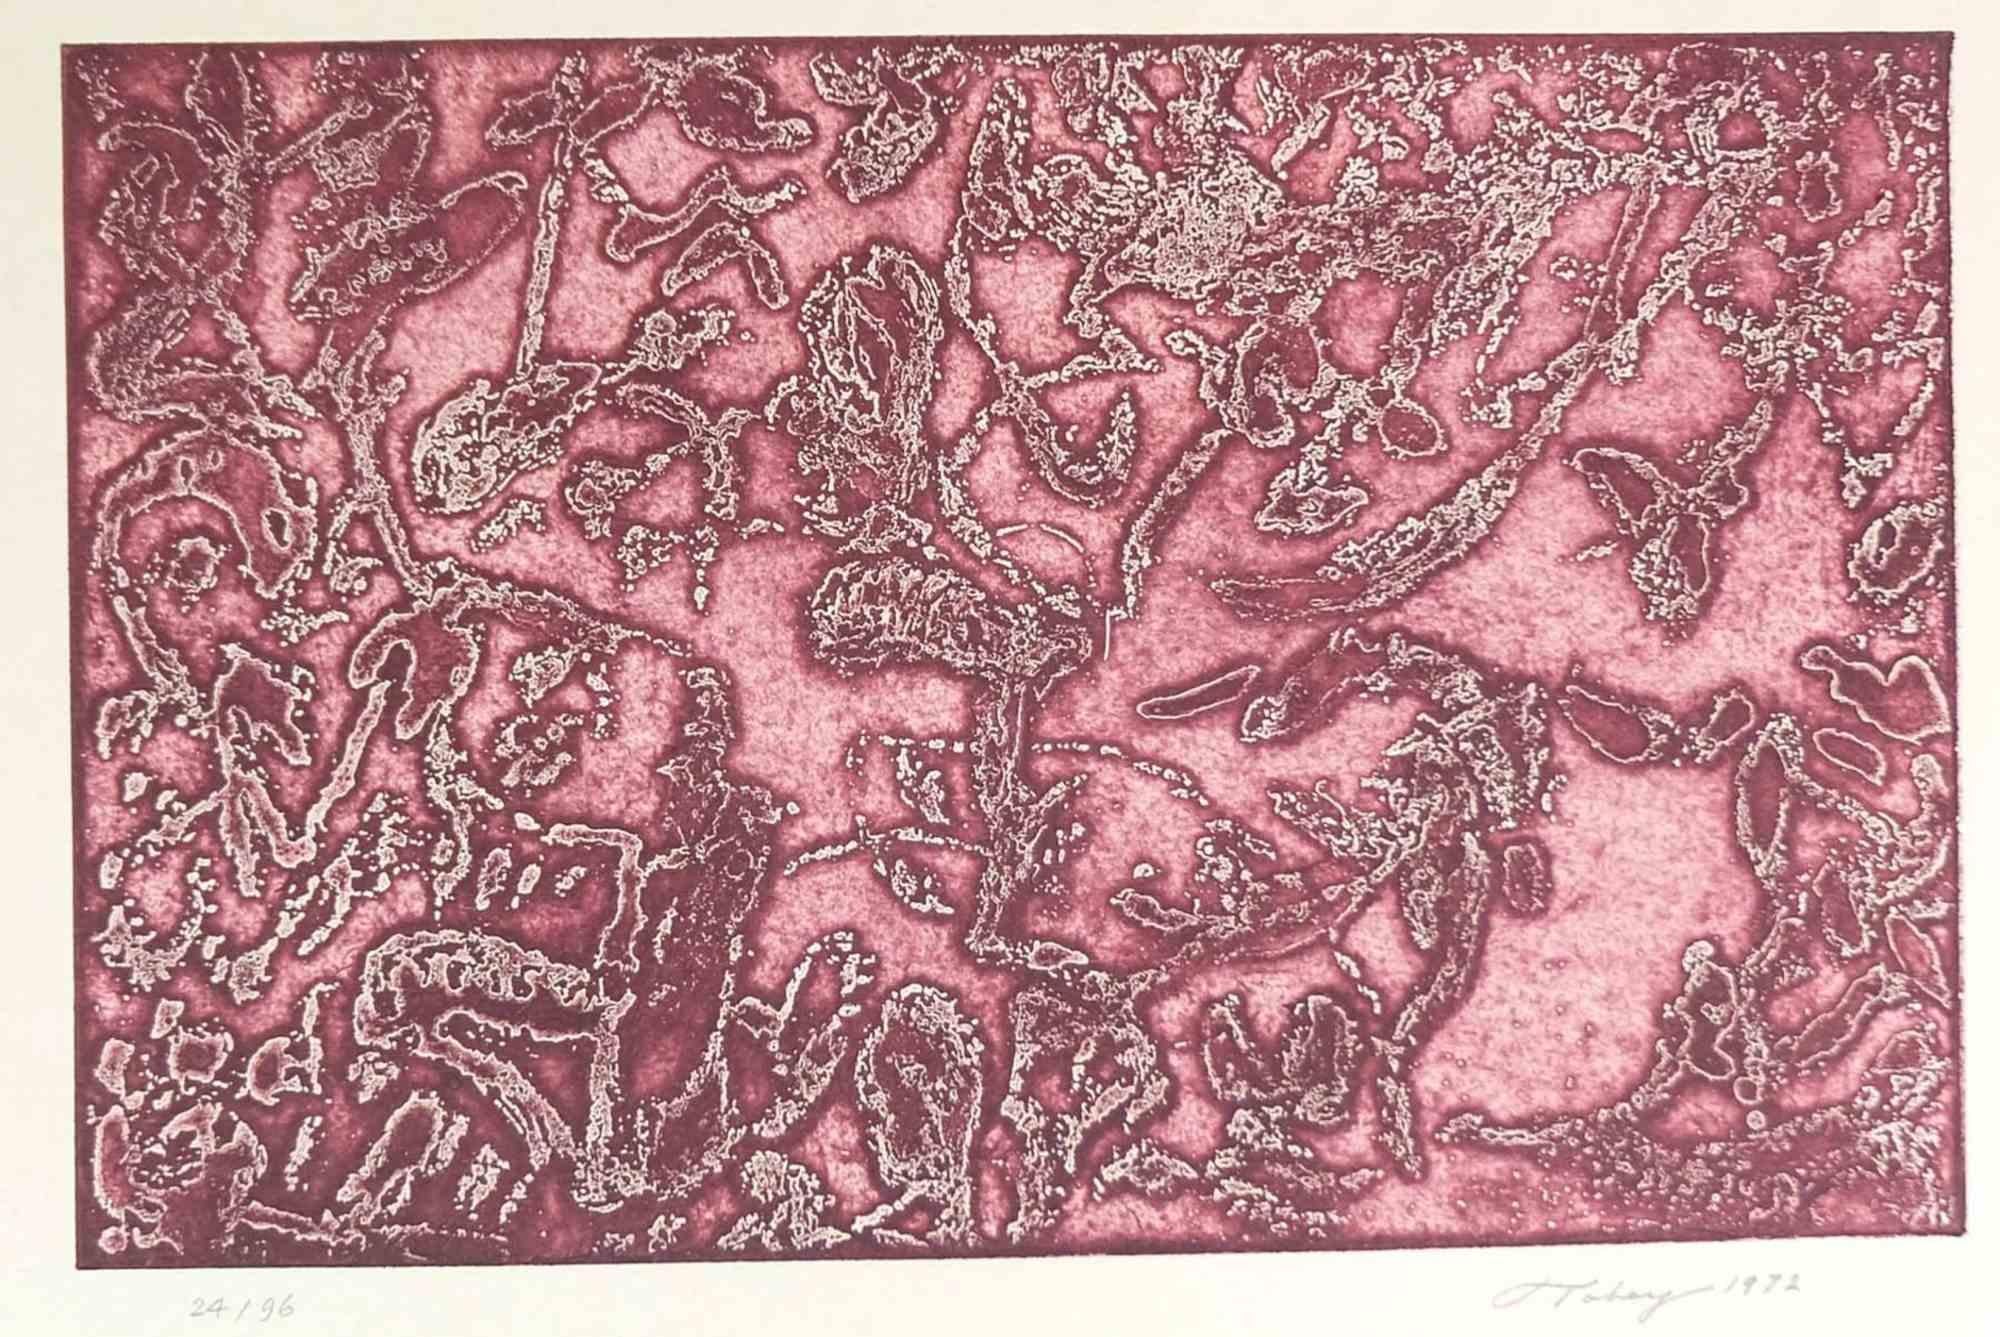 Pink Composition - Original Etching and Aquatint on Paper by Mark Tobey - 1972